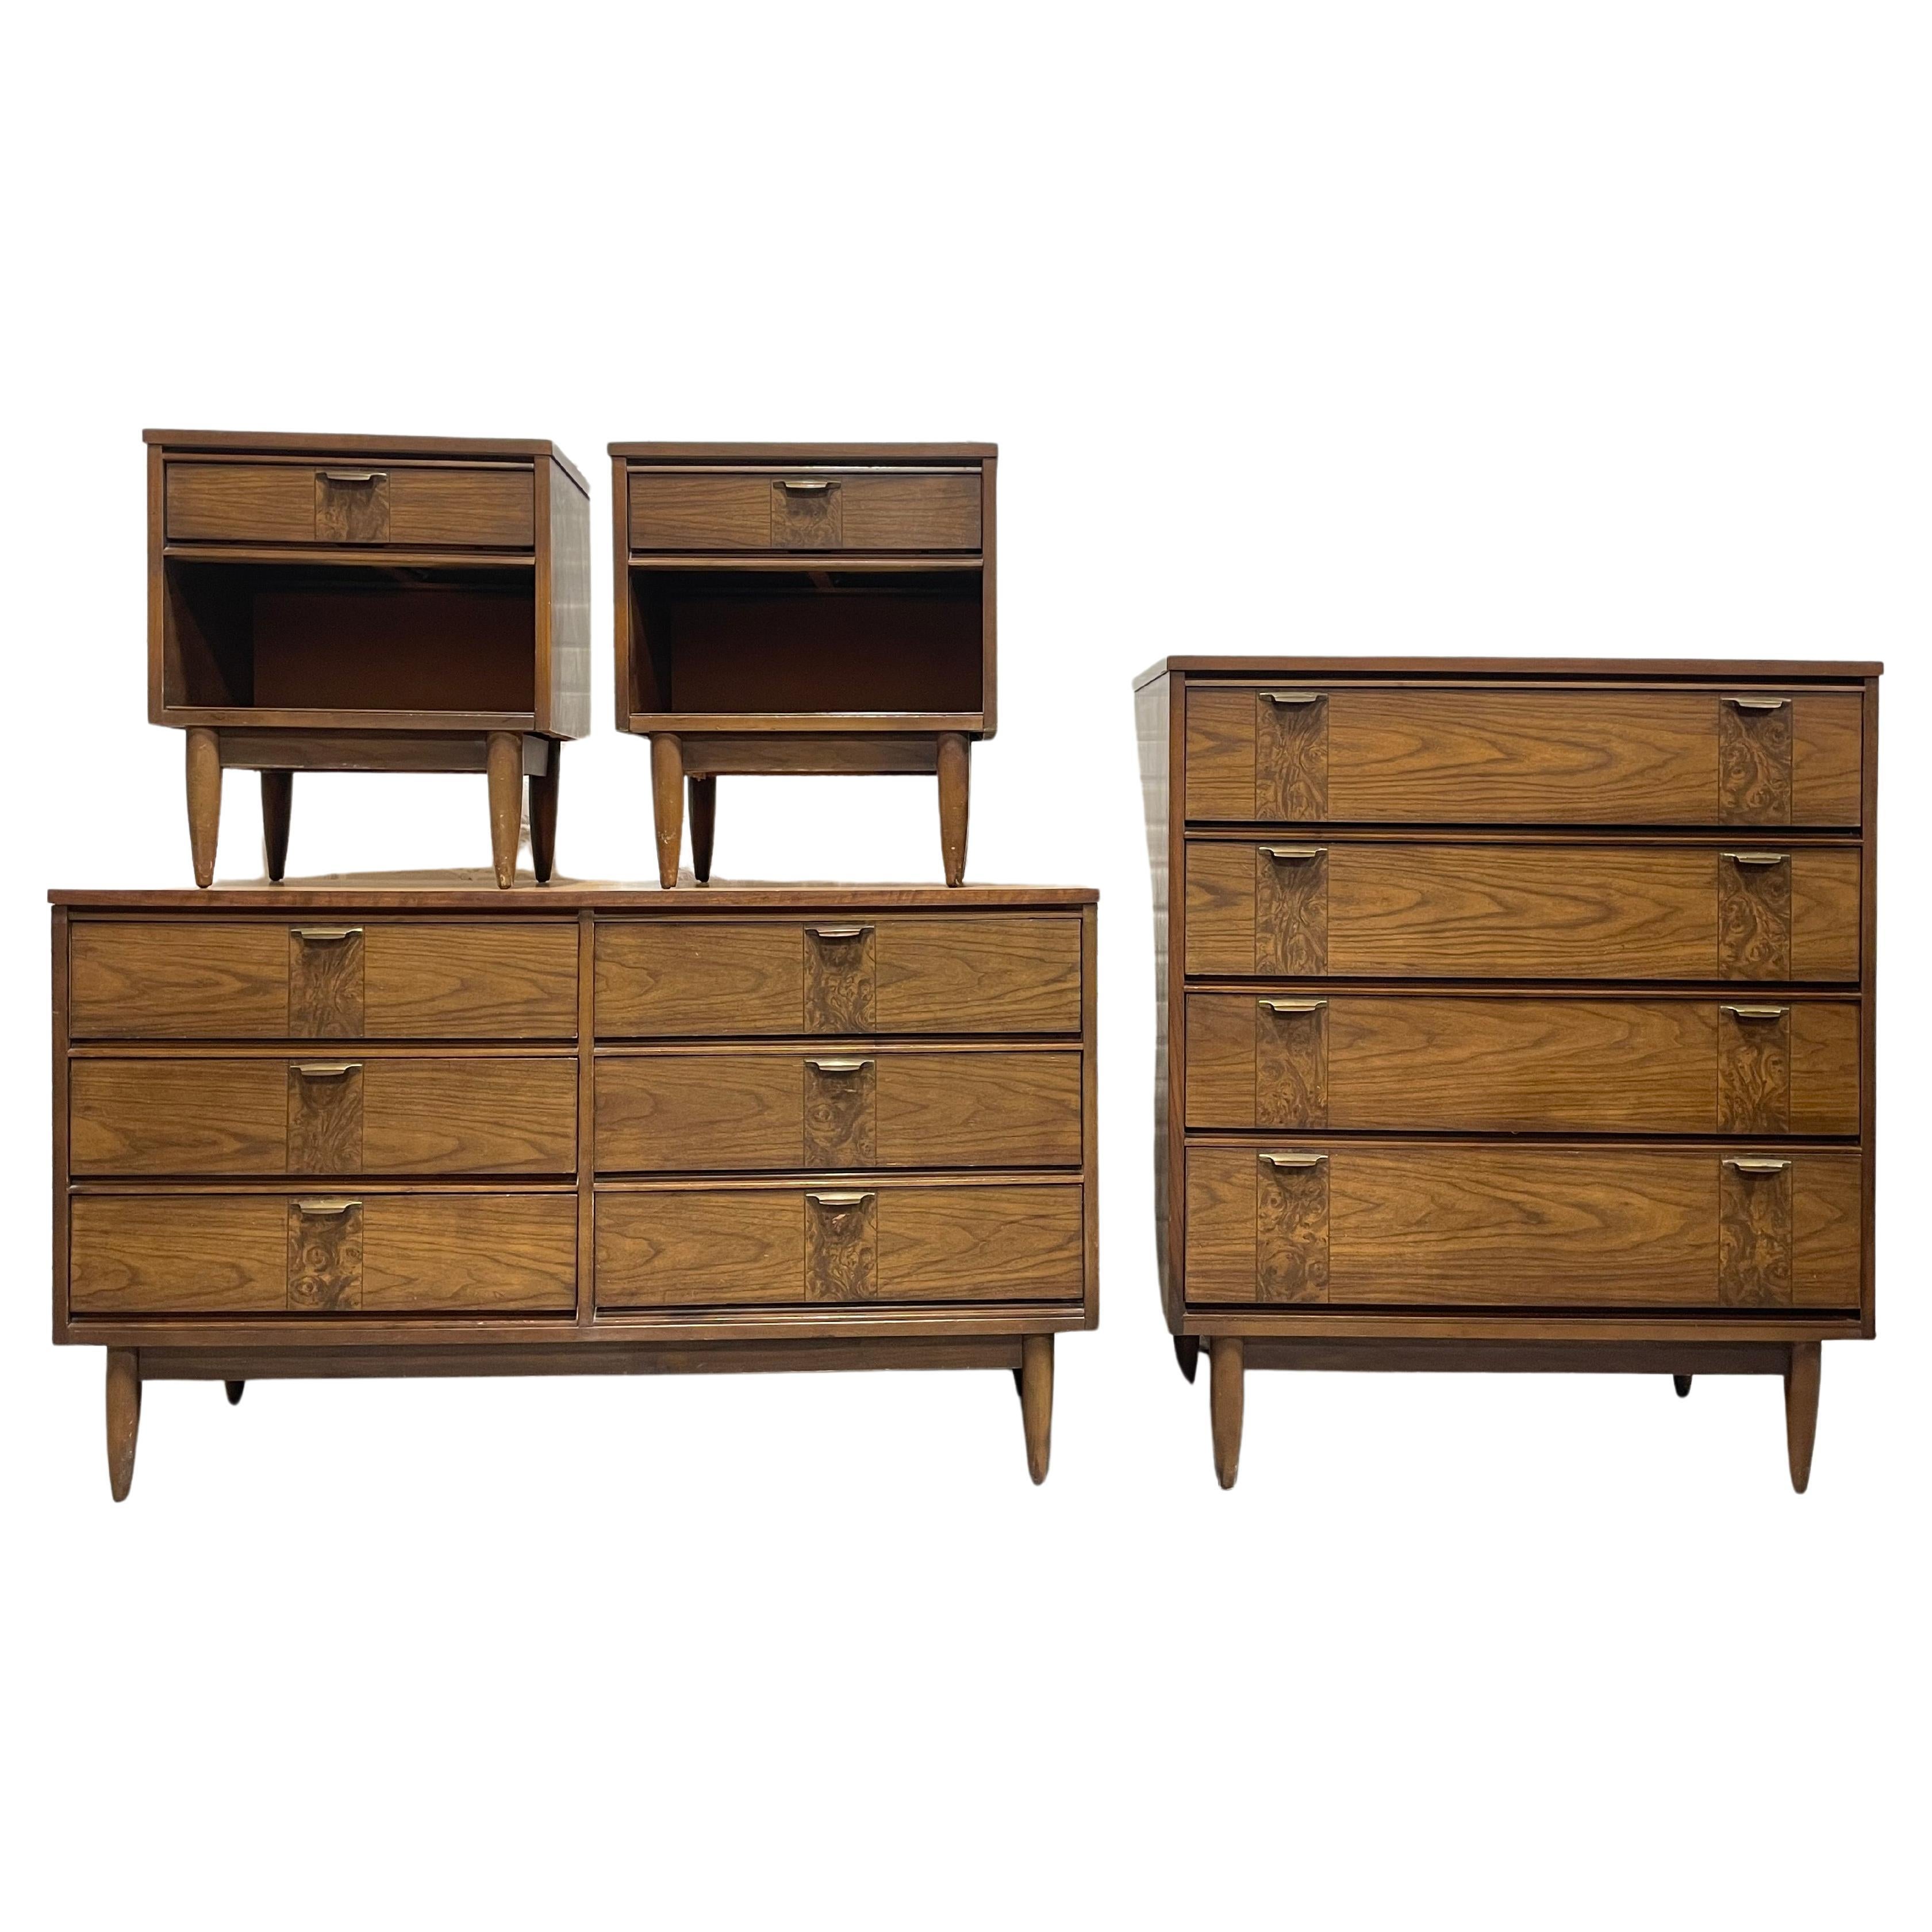 Mid Century Modern Walnut Bedroom Set, c. 1960's. This magnificent set consists of a long dresser, tall dresser and pair of nightstands. Each piece is highlighted by a decorative design along the drawer facade, tapered legs and solid and sturdy